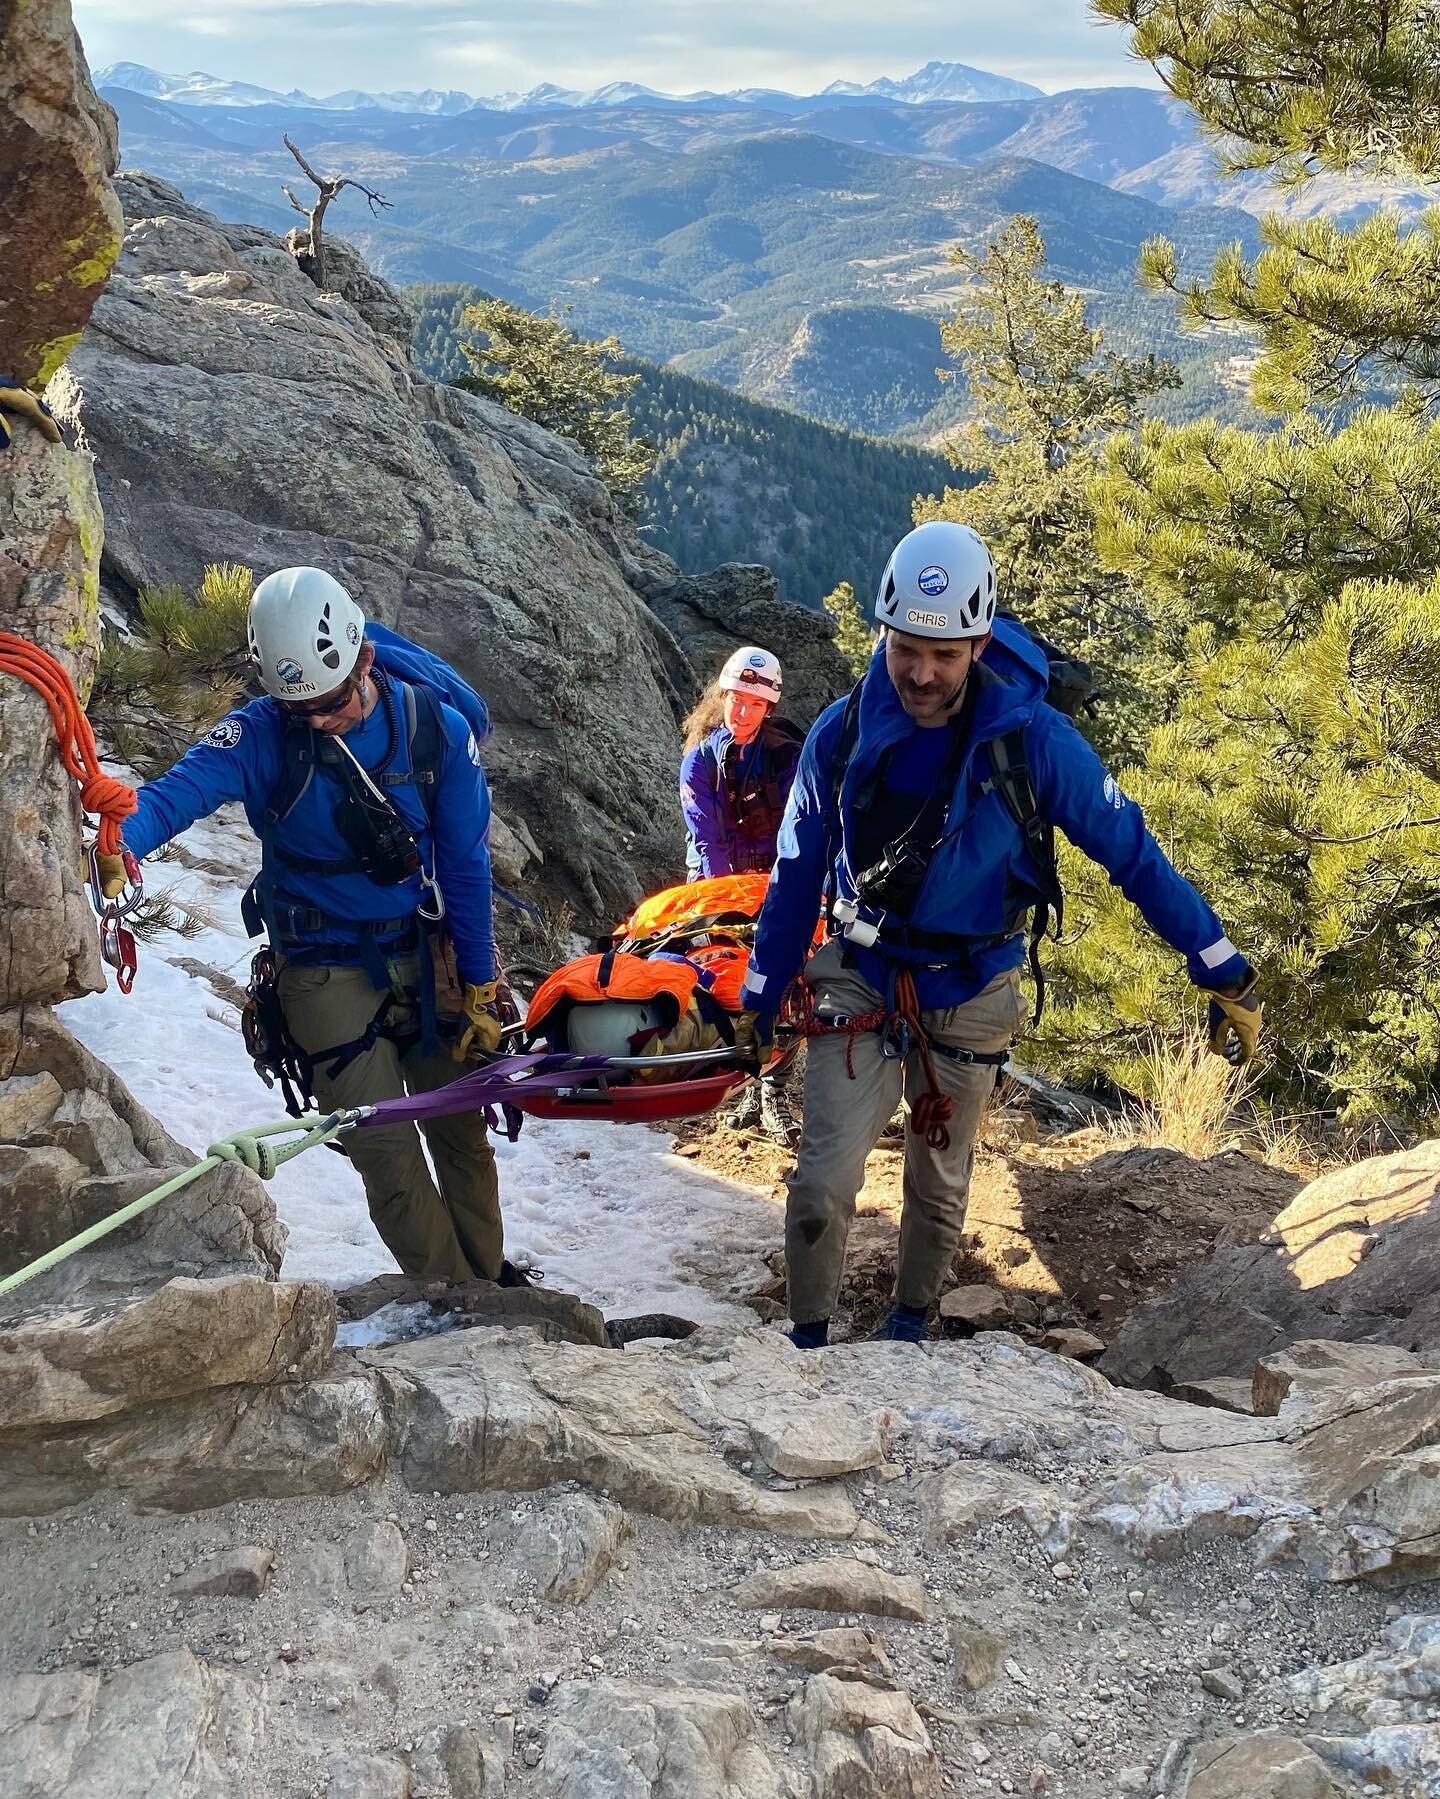 Last Friday, we assisted a person who took a 25&rsquo; fall after slipping on icy rock at Lost Gulch Overlook. This was the start of a busy weekend for us including a team medical training and three missions. We encourage everyone to stay safe as the